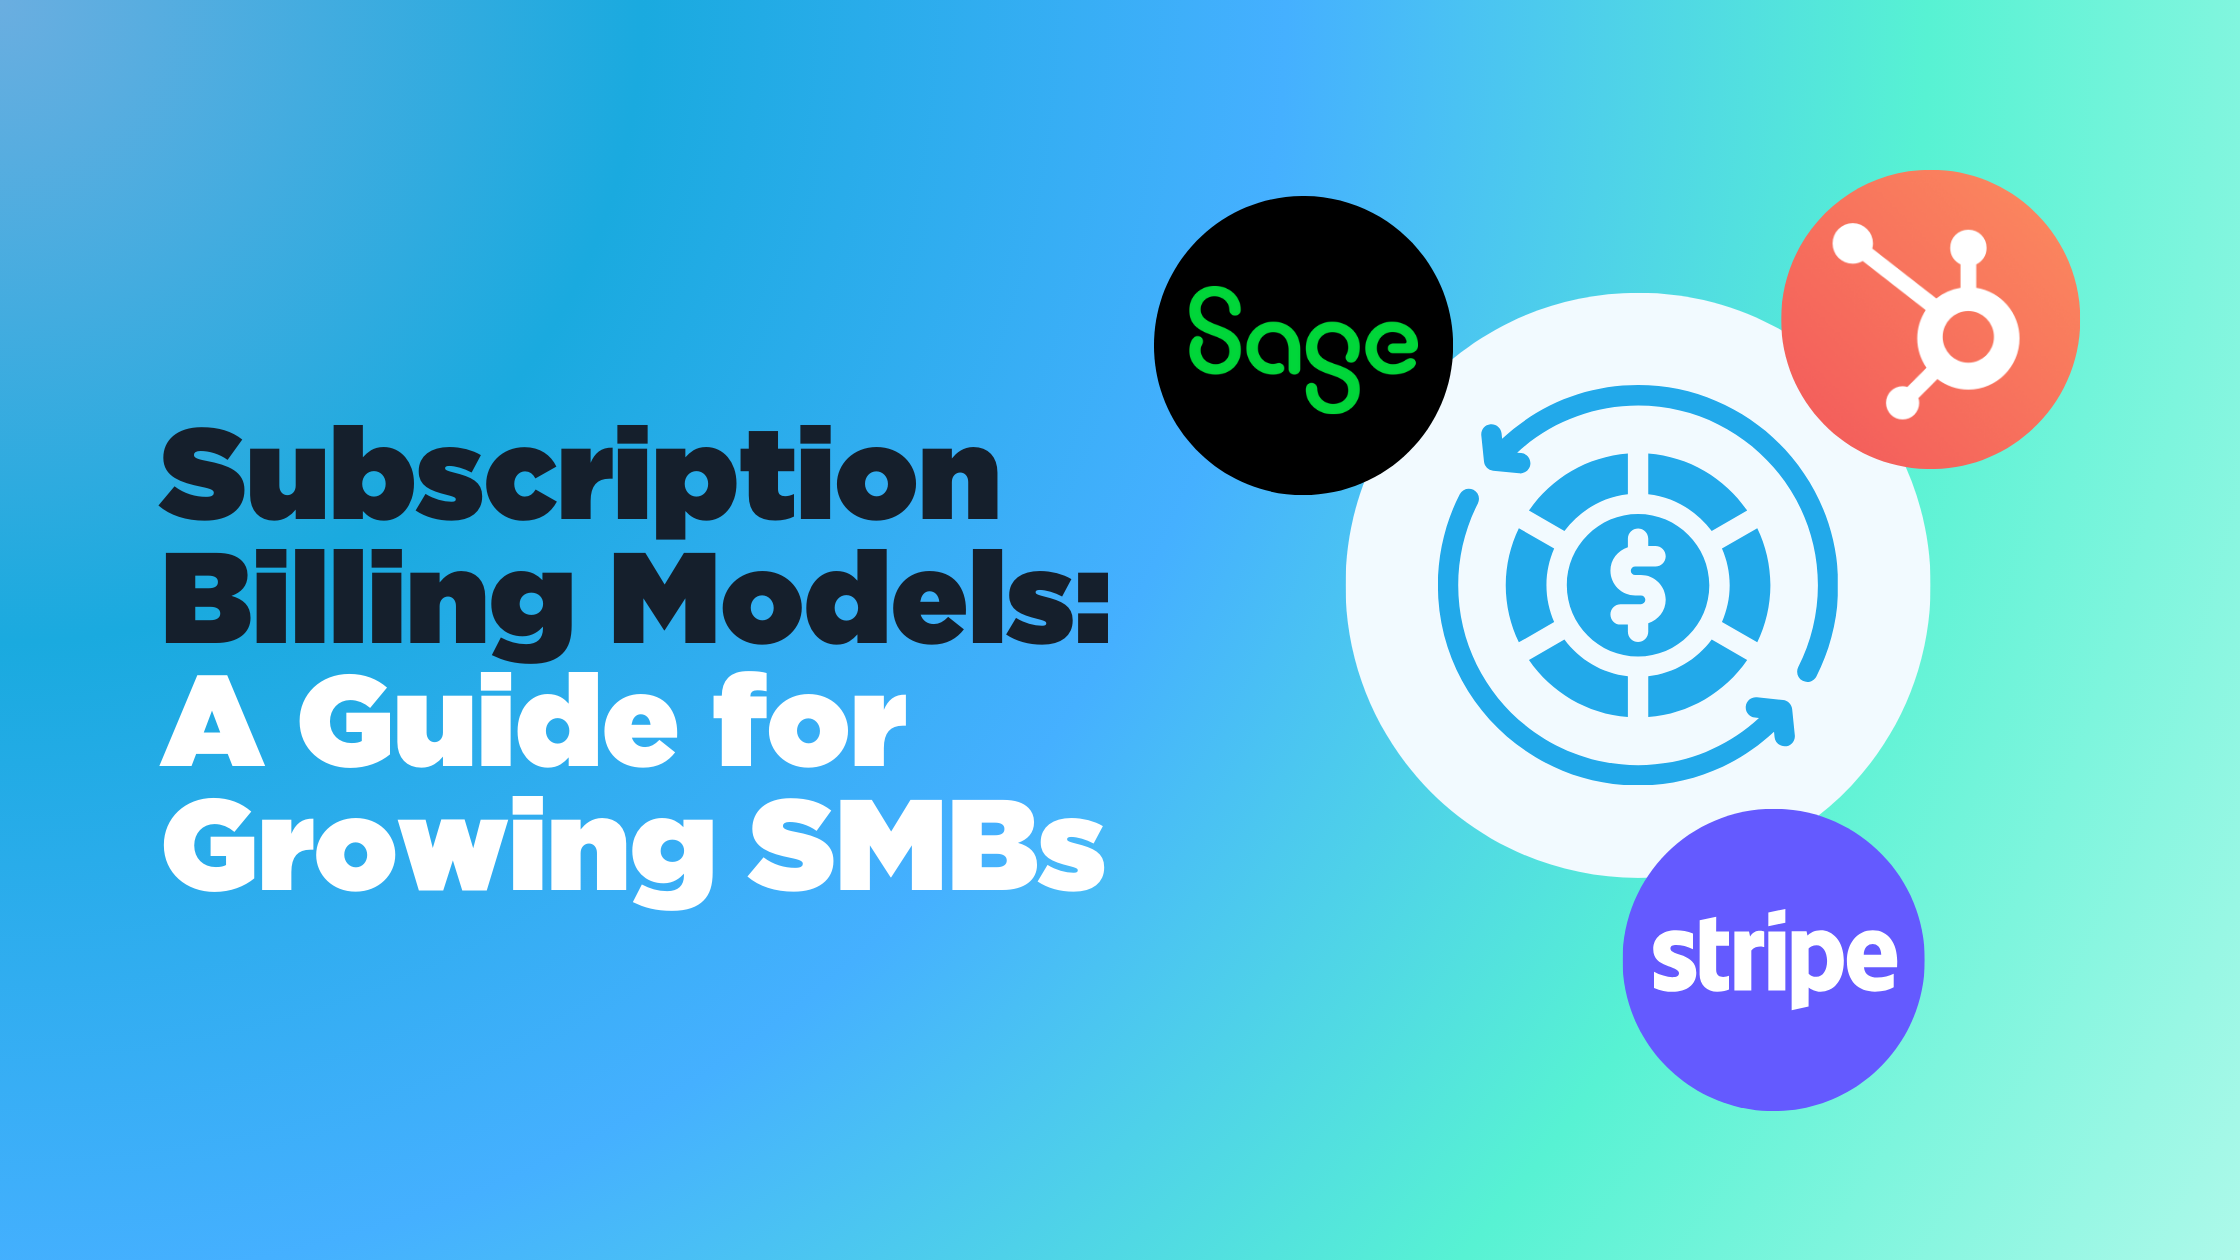 Subscription Billing Models: A Guide for Growing SMBs